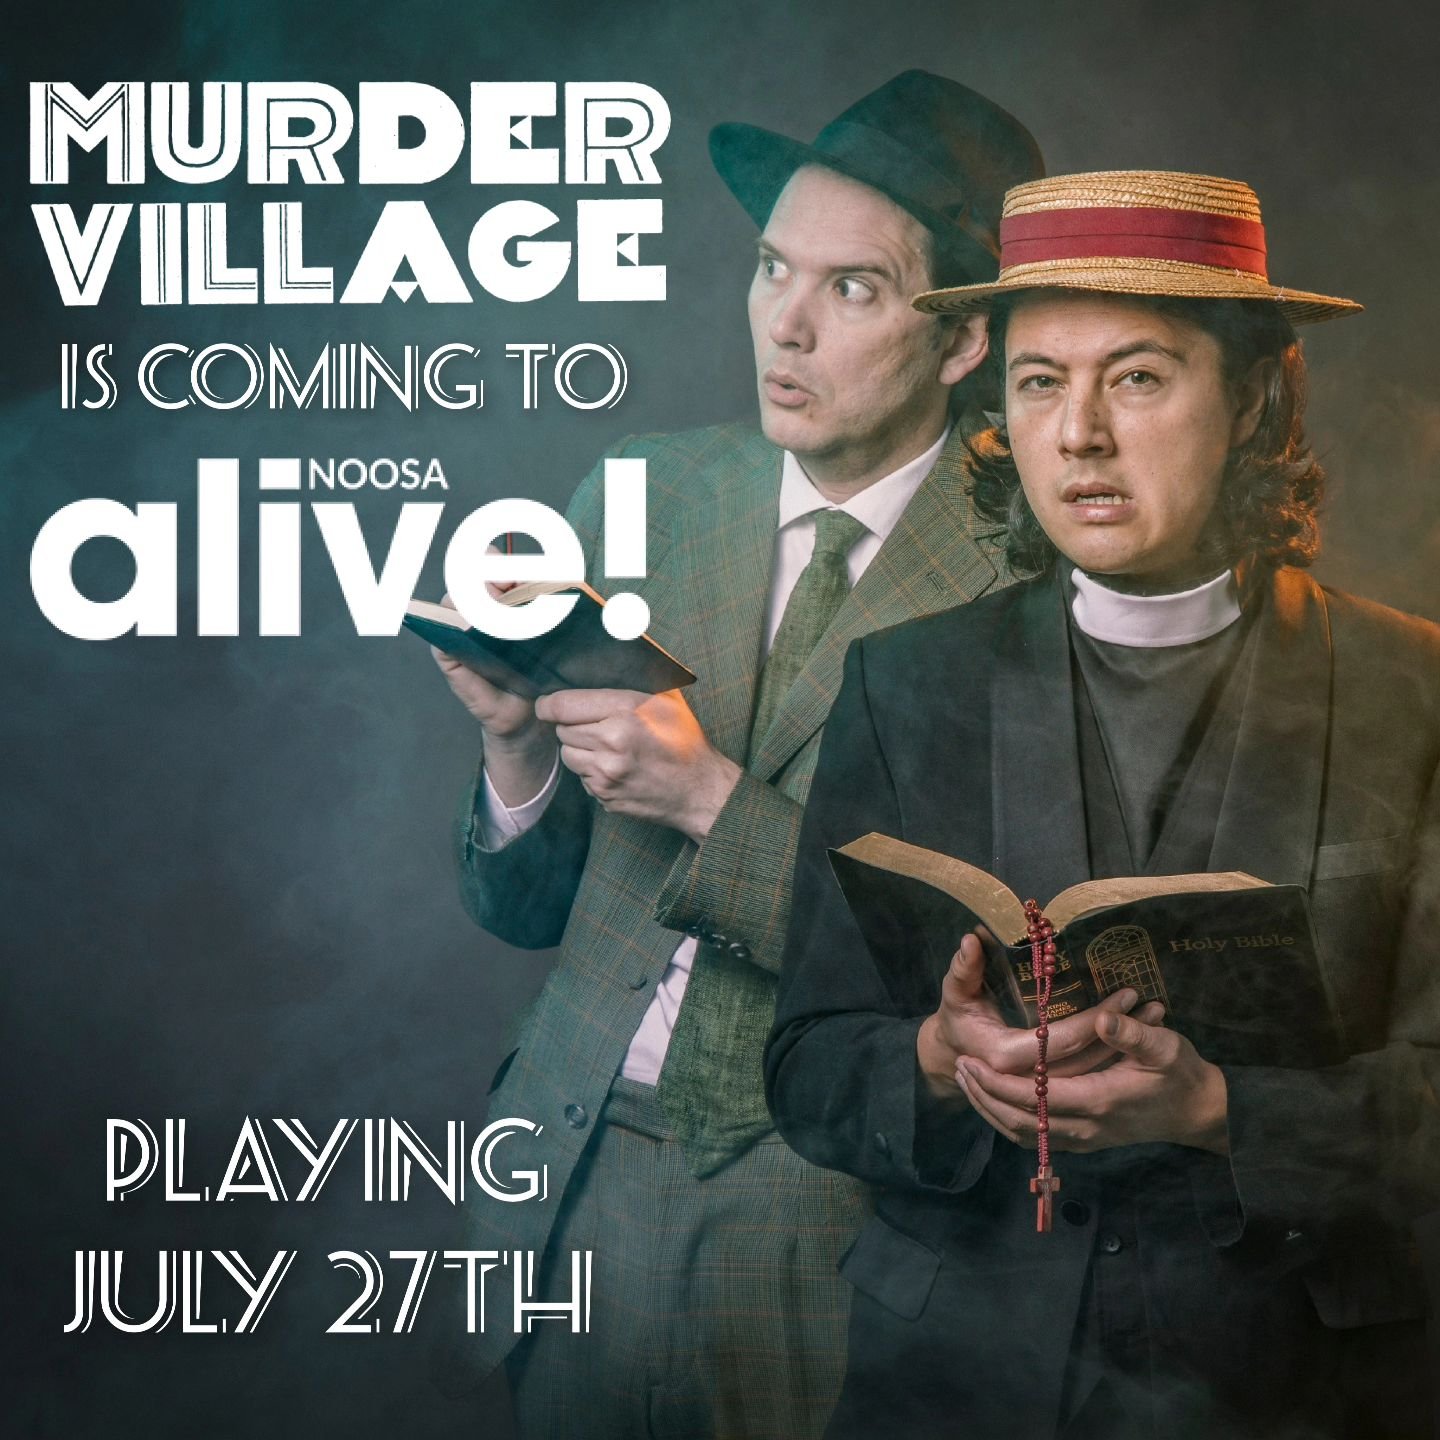 New season announcement! Murder Village is going coastal this July with our first ever trip to Noosa for the @noosa_alive festival! We have just two performances - improvised whodunnits where your votes determine who lives and who dies. Step into the